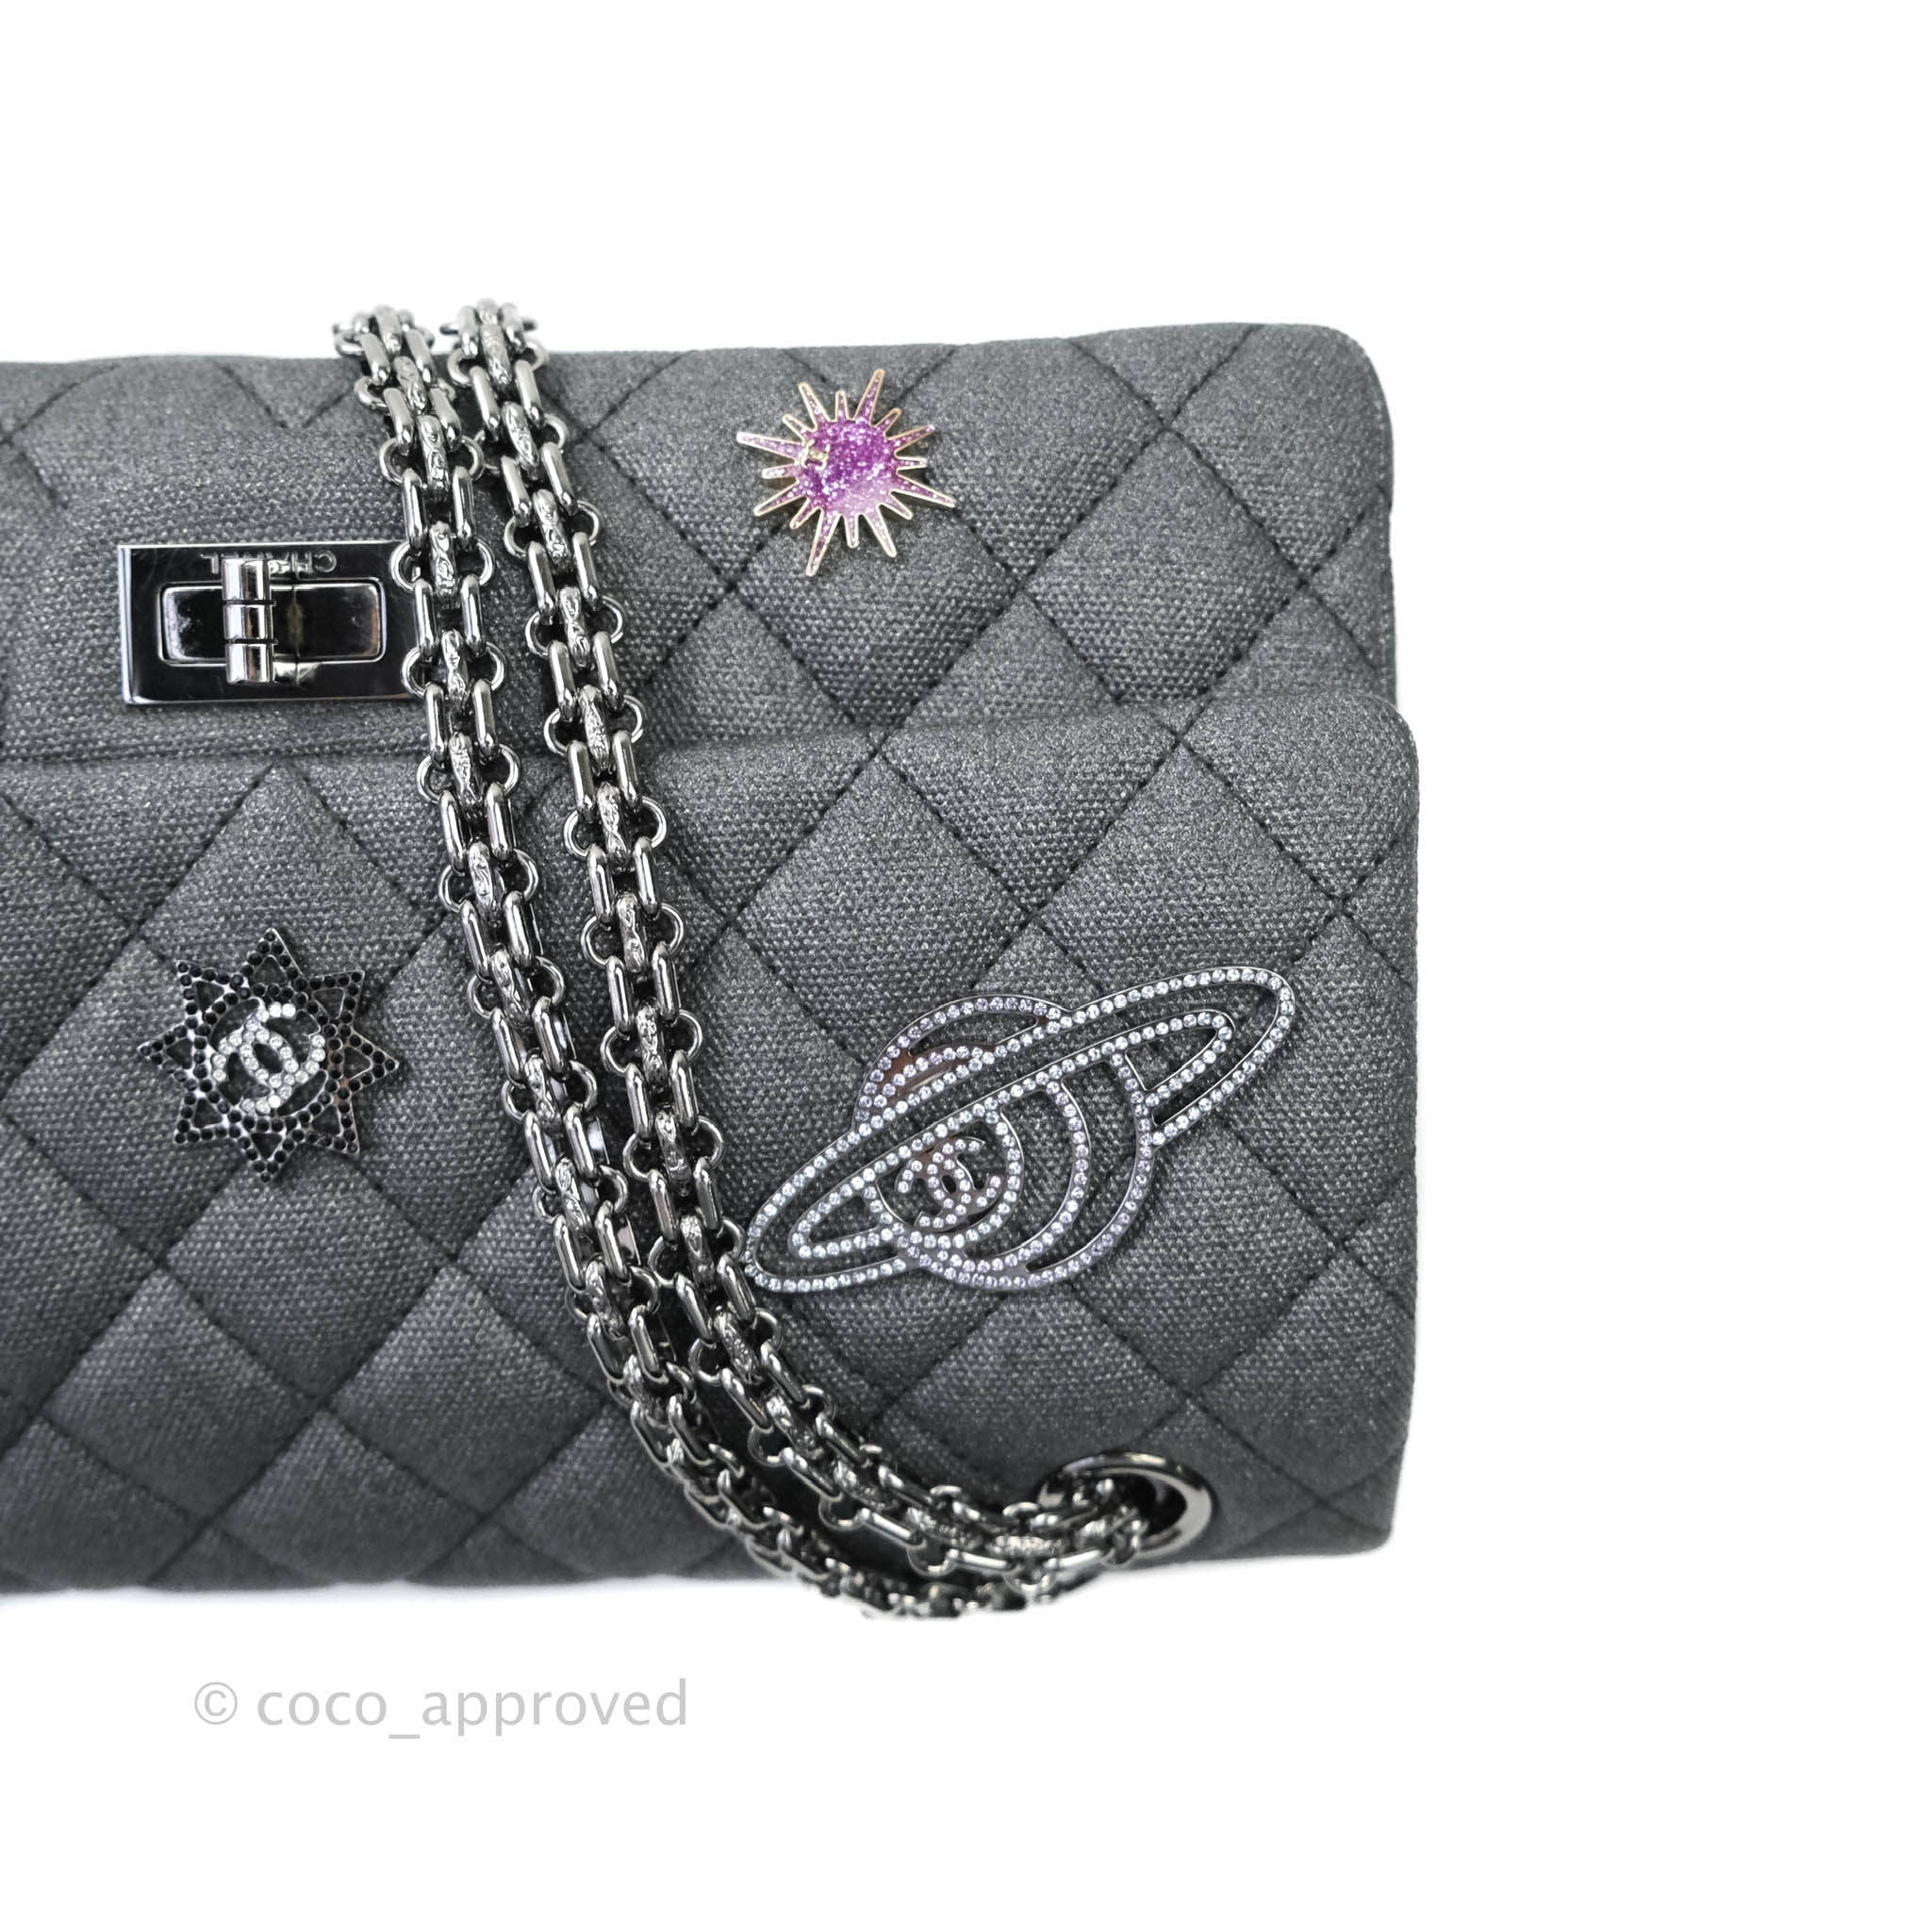 Chanel 2.55 Reissue Lucky Charms 225 Flap Iridescent Metallic Grey